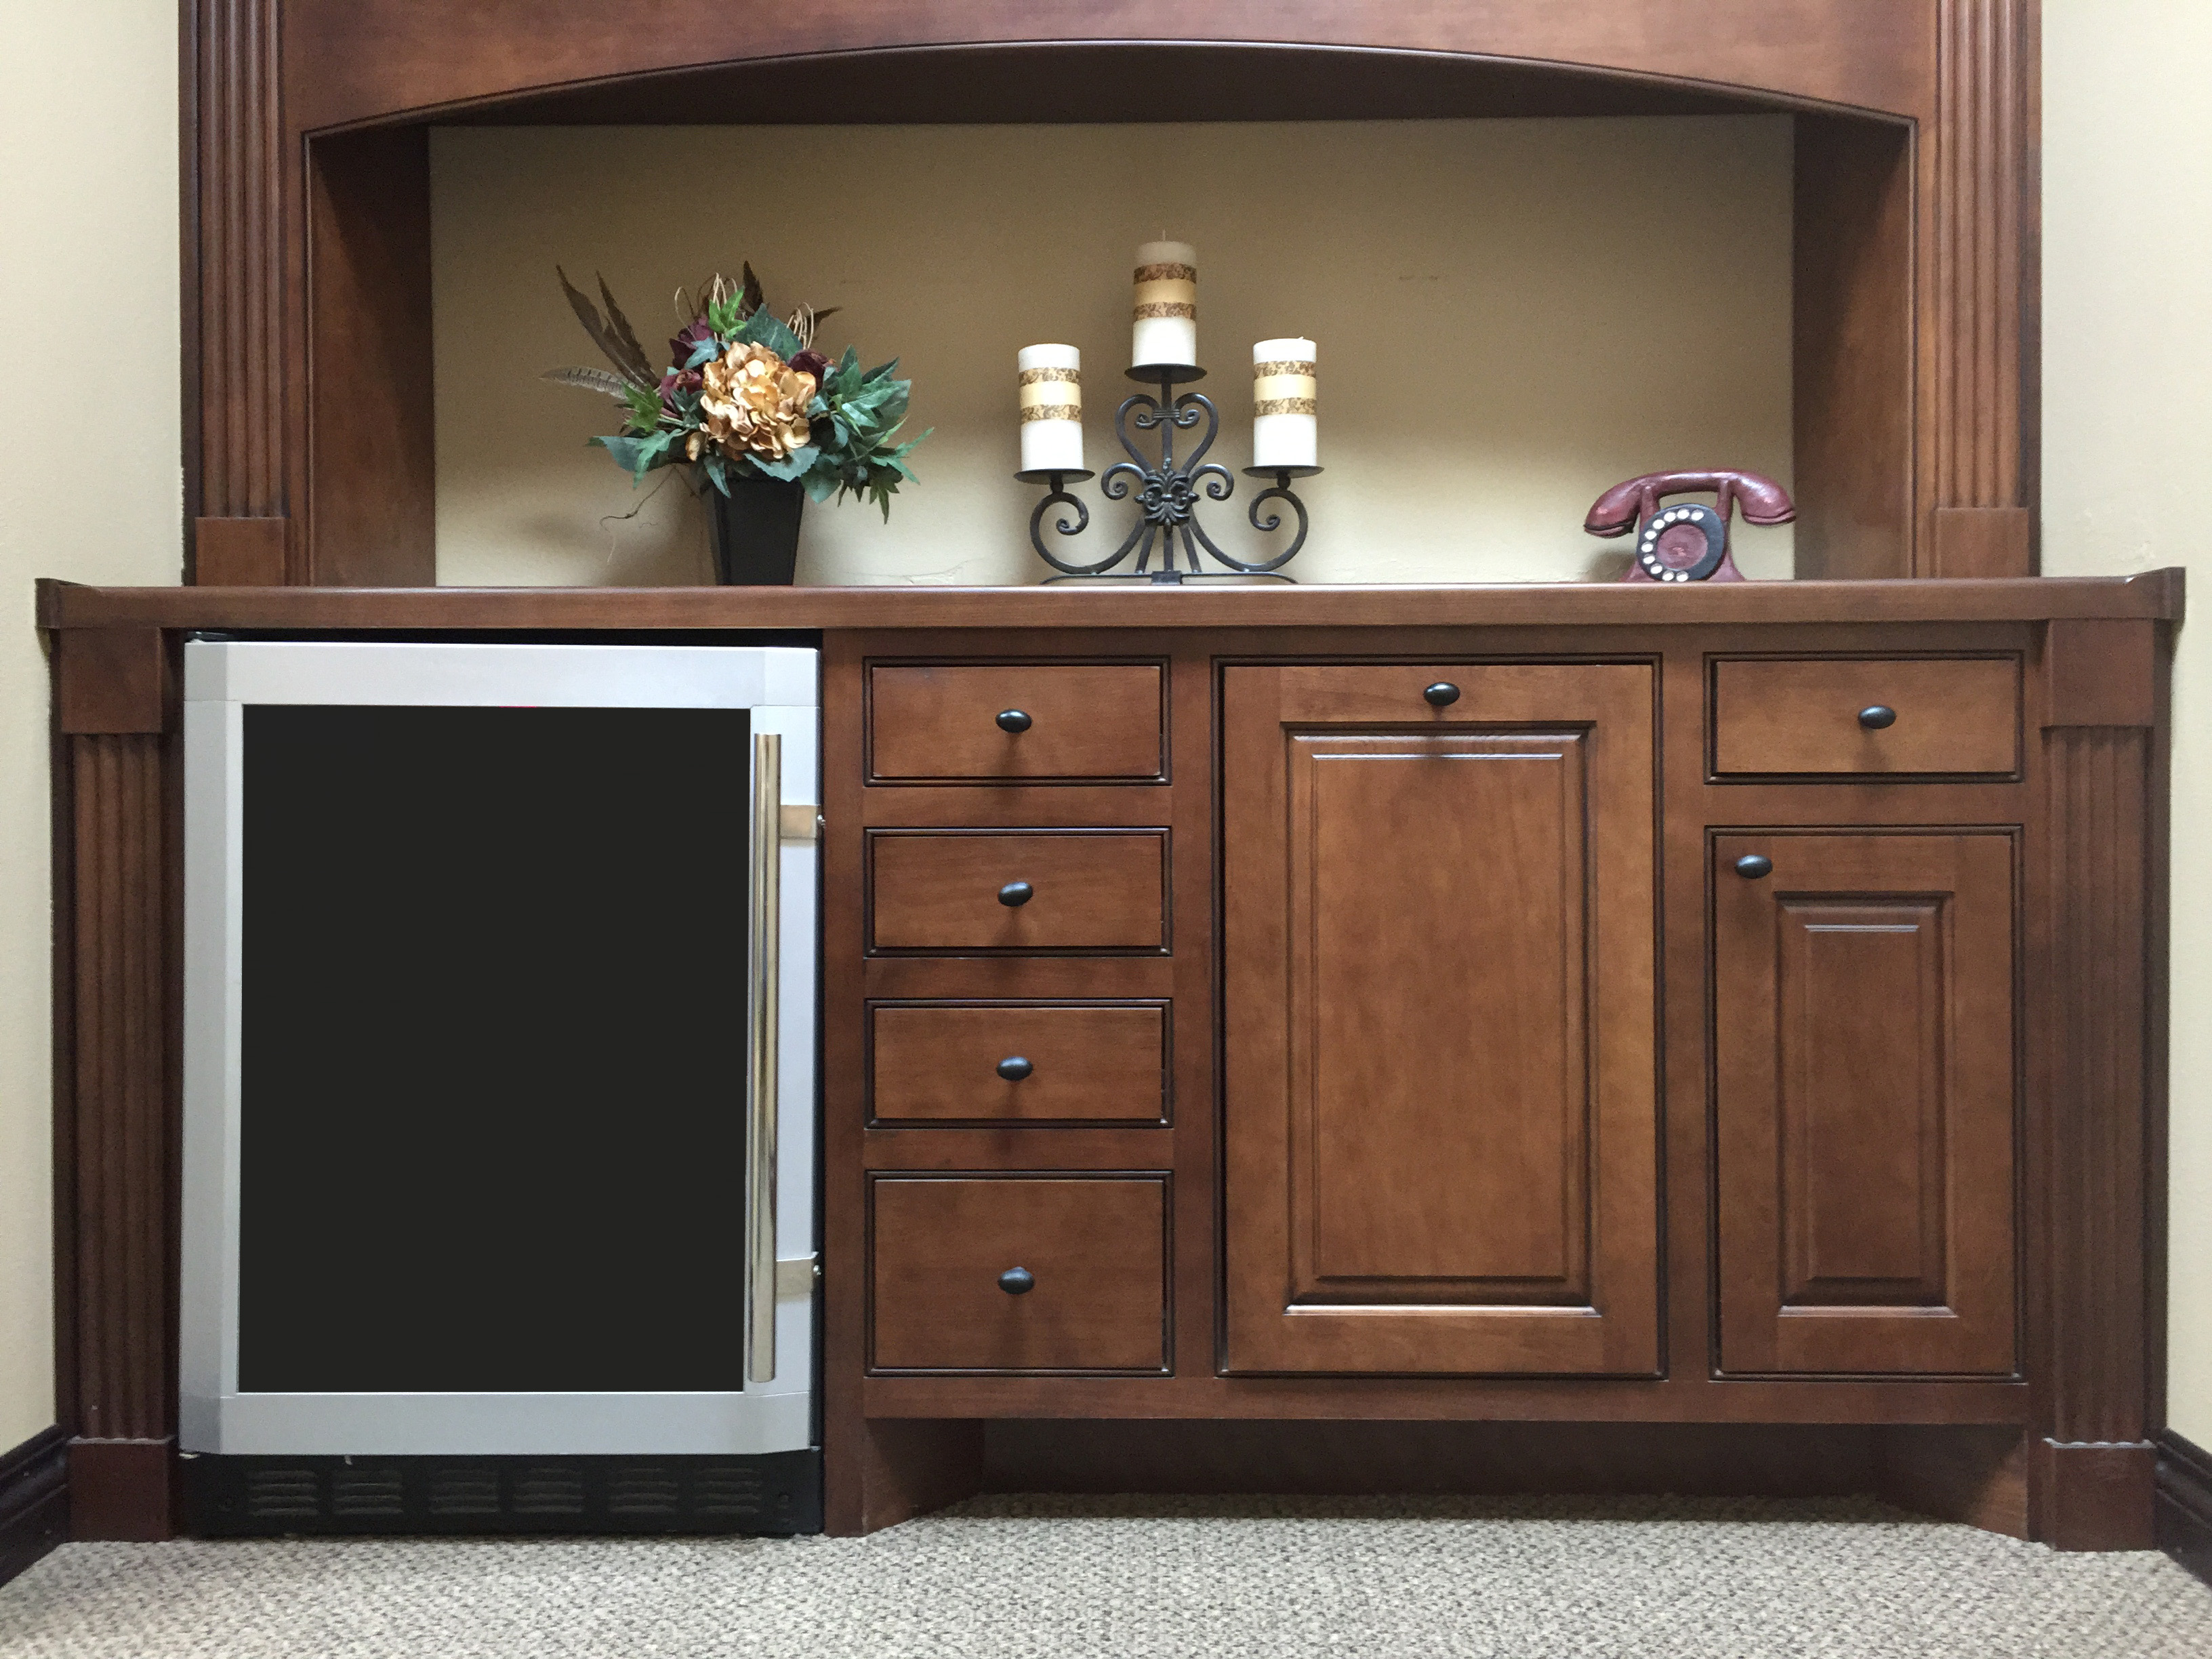 cabinet with flush inset cabinet doors and drawer fronts